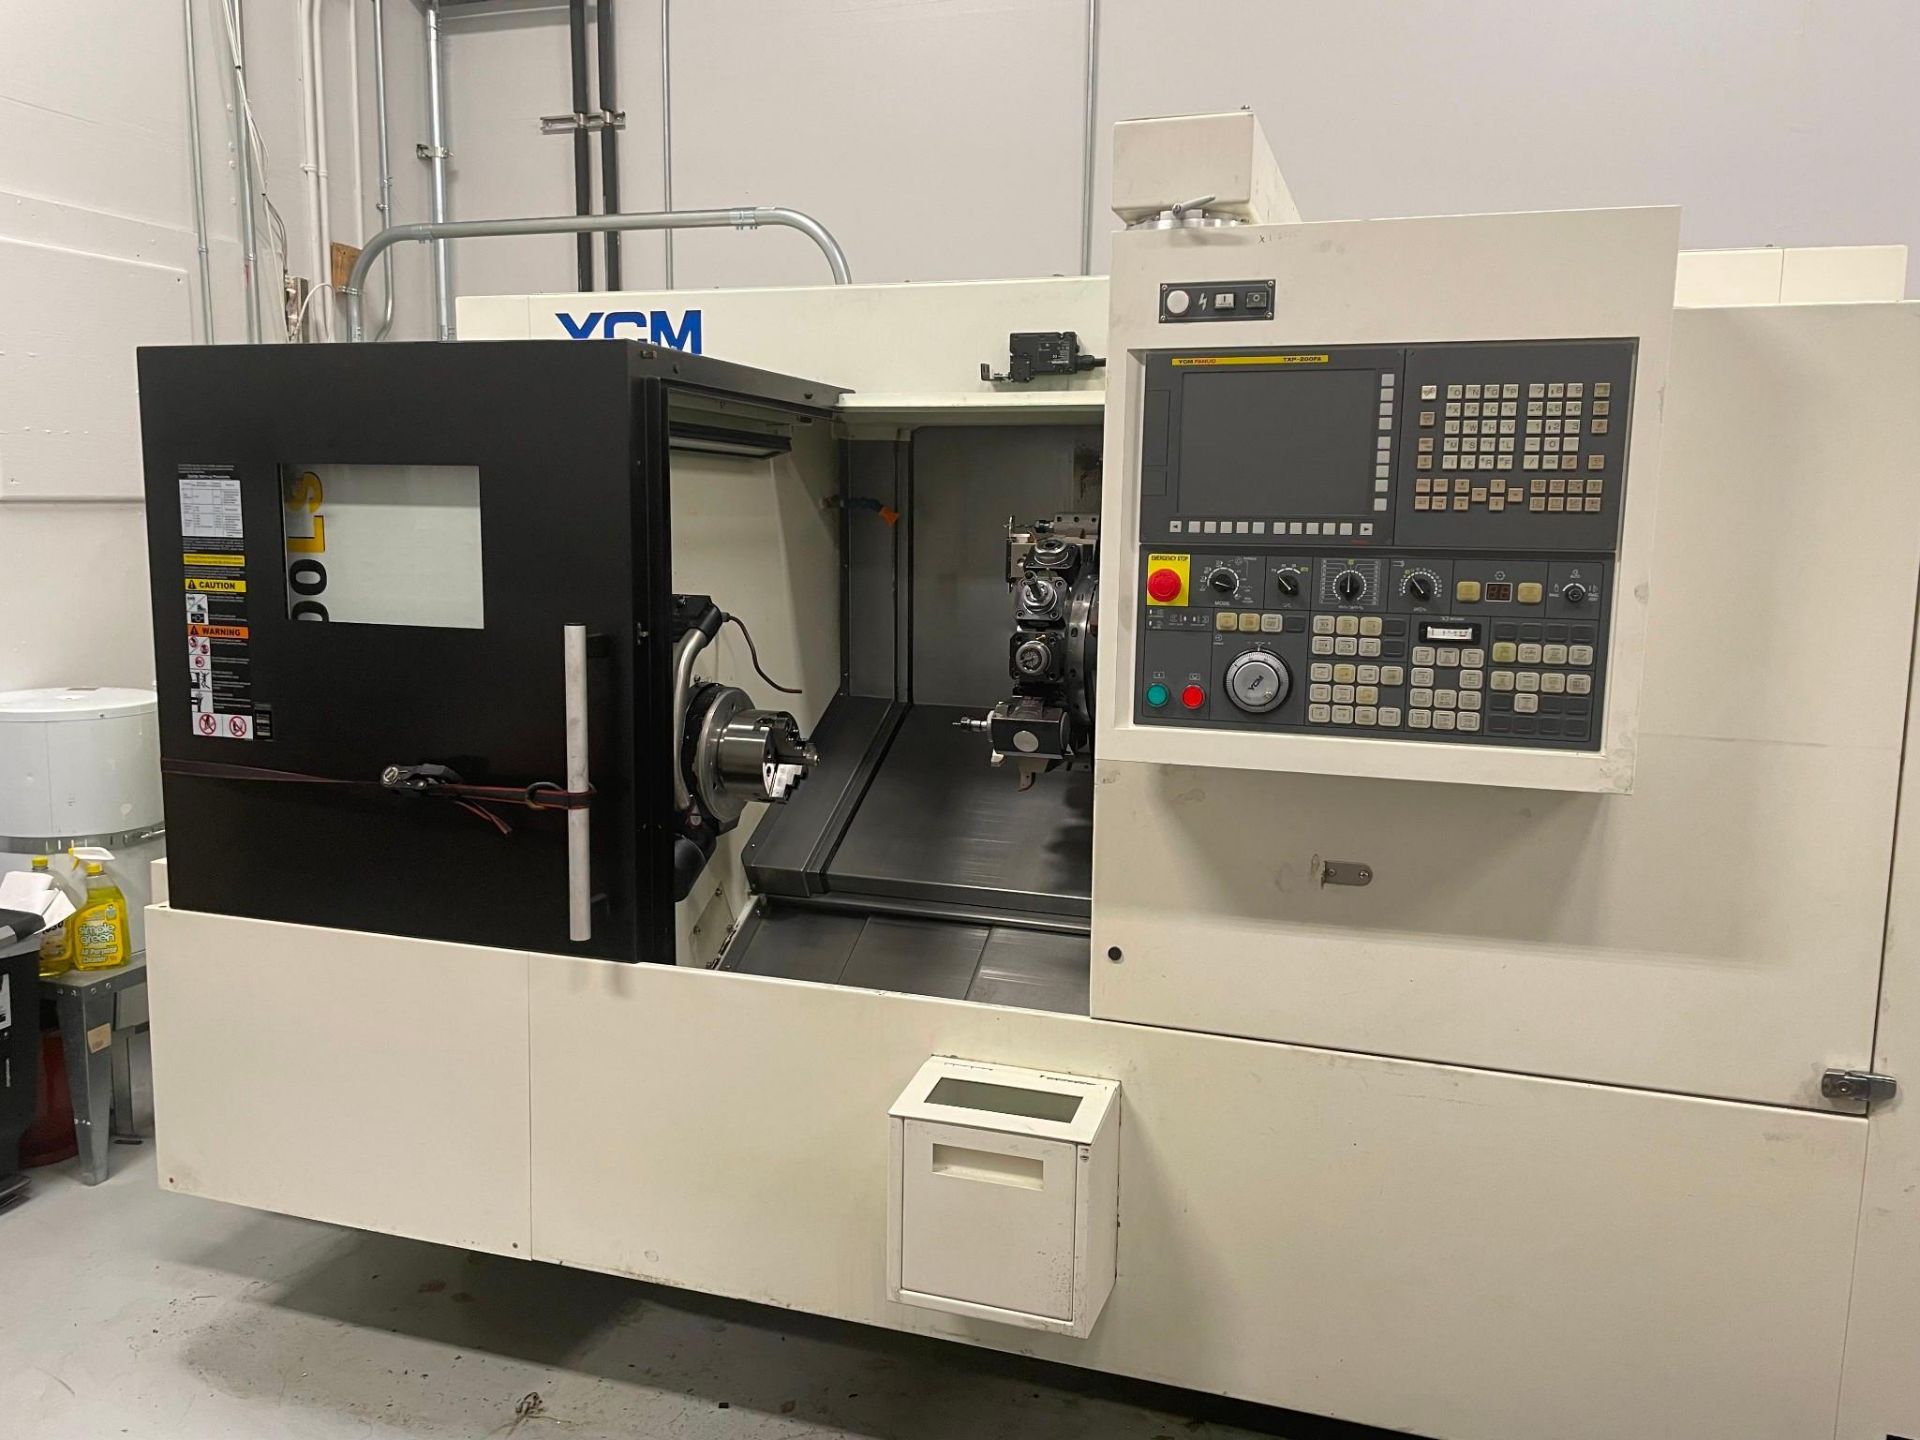 YCM NTC-1600LSY CNC LATHE, 2017 - DUAL SPINDLE, LIVE TOOLING, POLYGON TURNING, FANUC CONTROL - Image 2 of 8